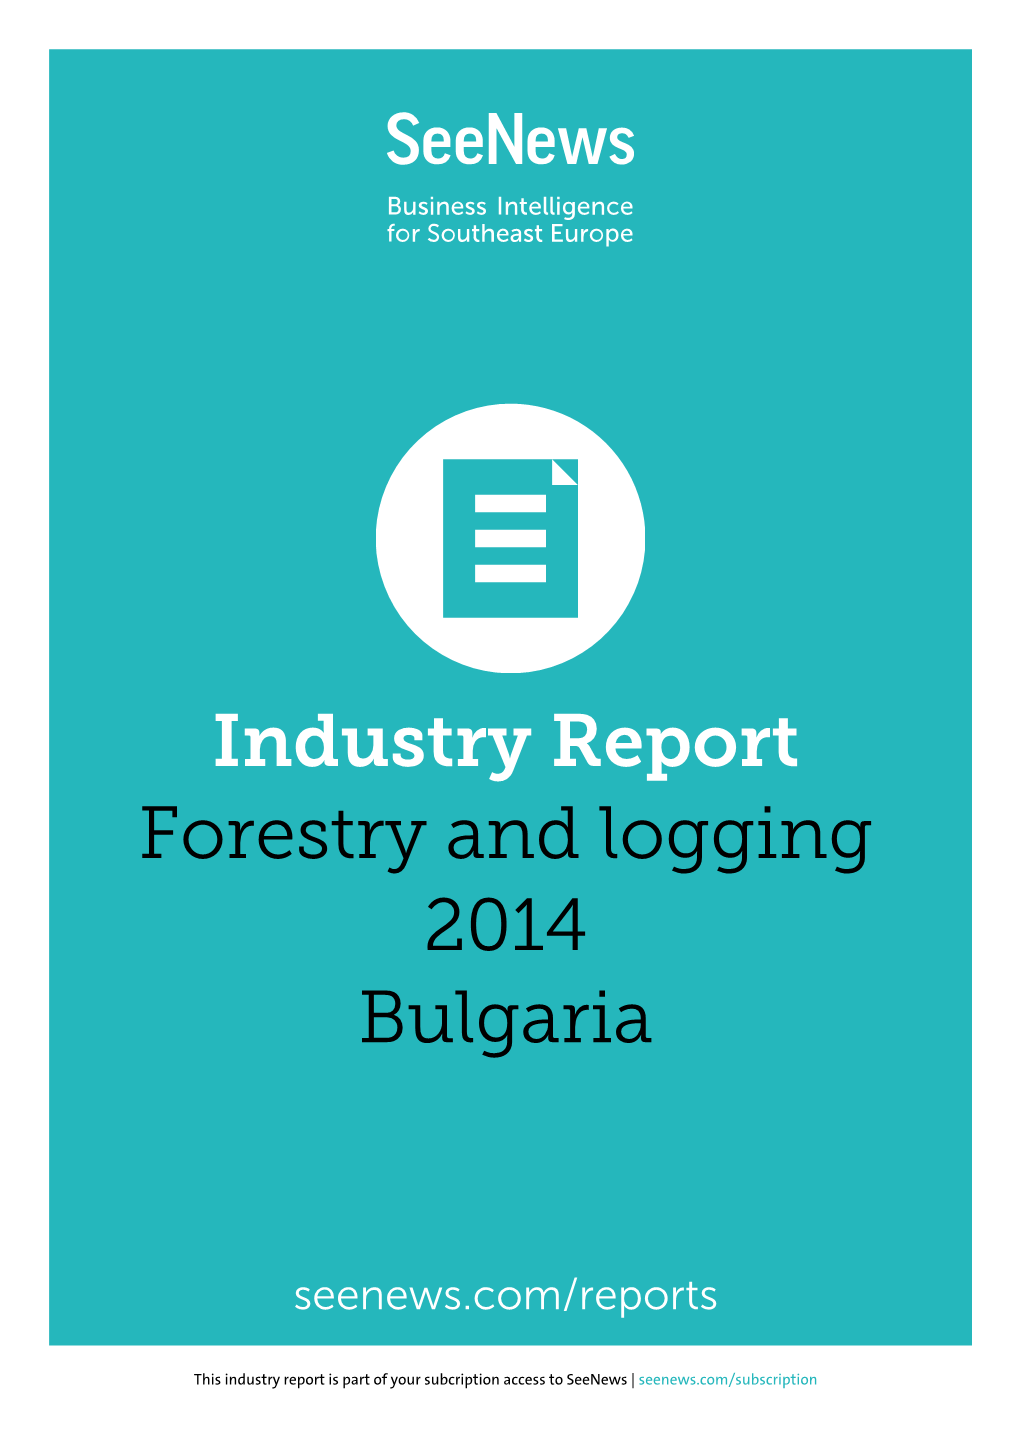 Industry Report Forestry and Logging 2014 Bulgaria